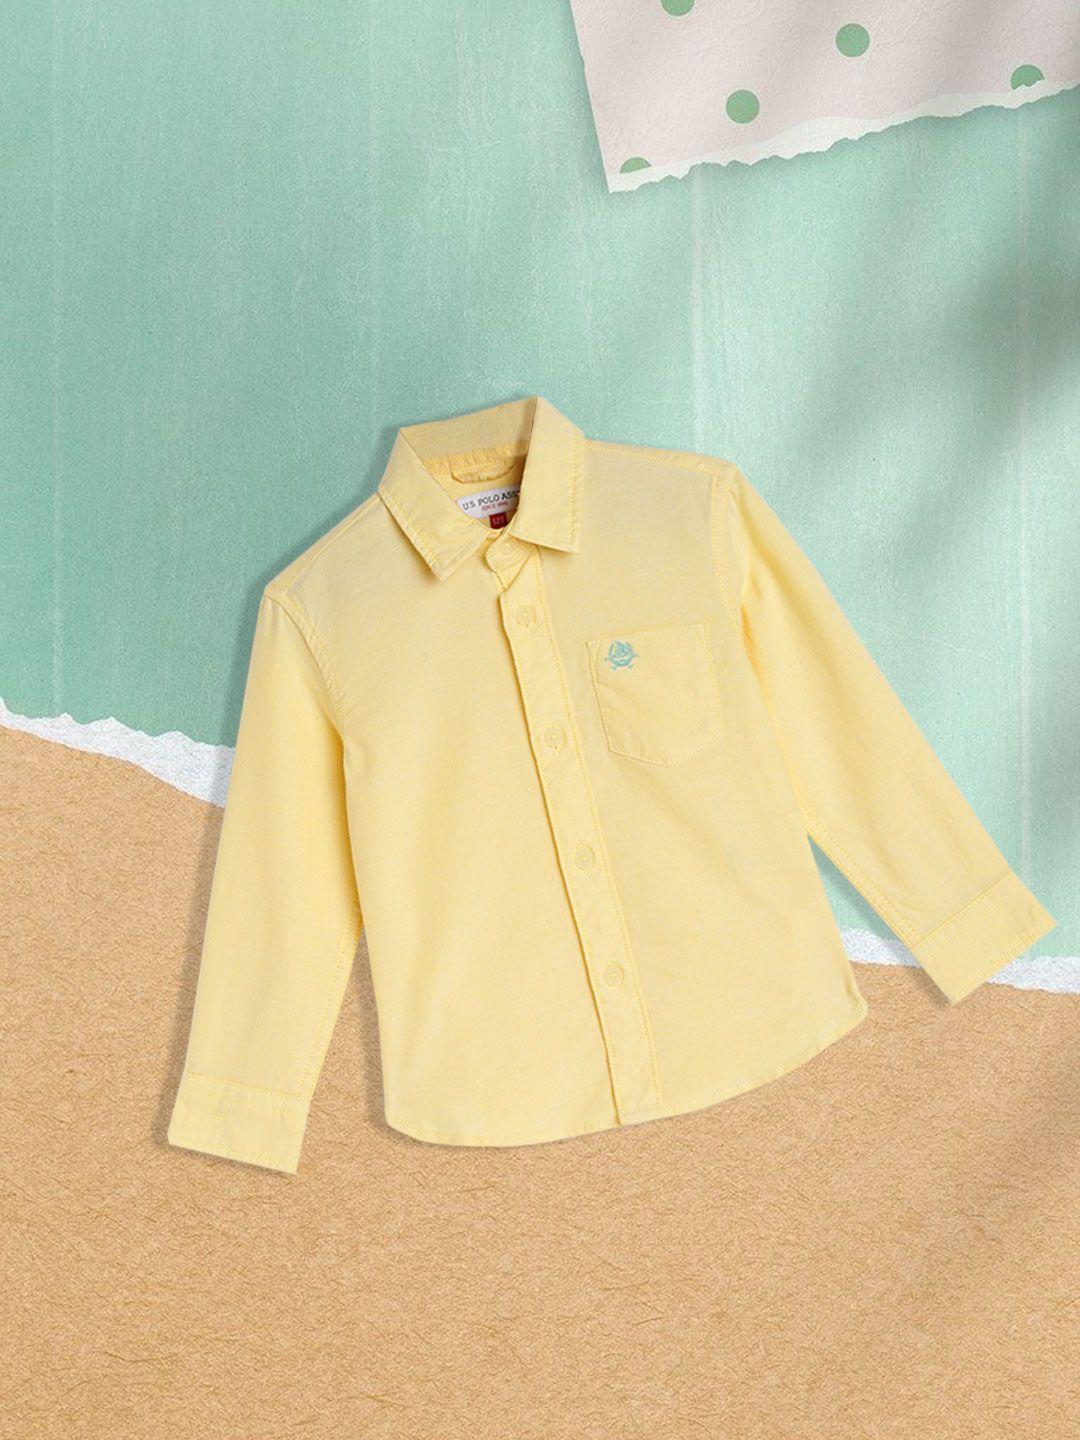 u.s. polo assn. kids boys yellow regular fit solid opaque cotton casual shirt with pocket